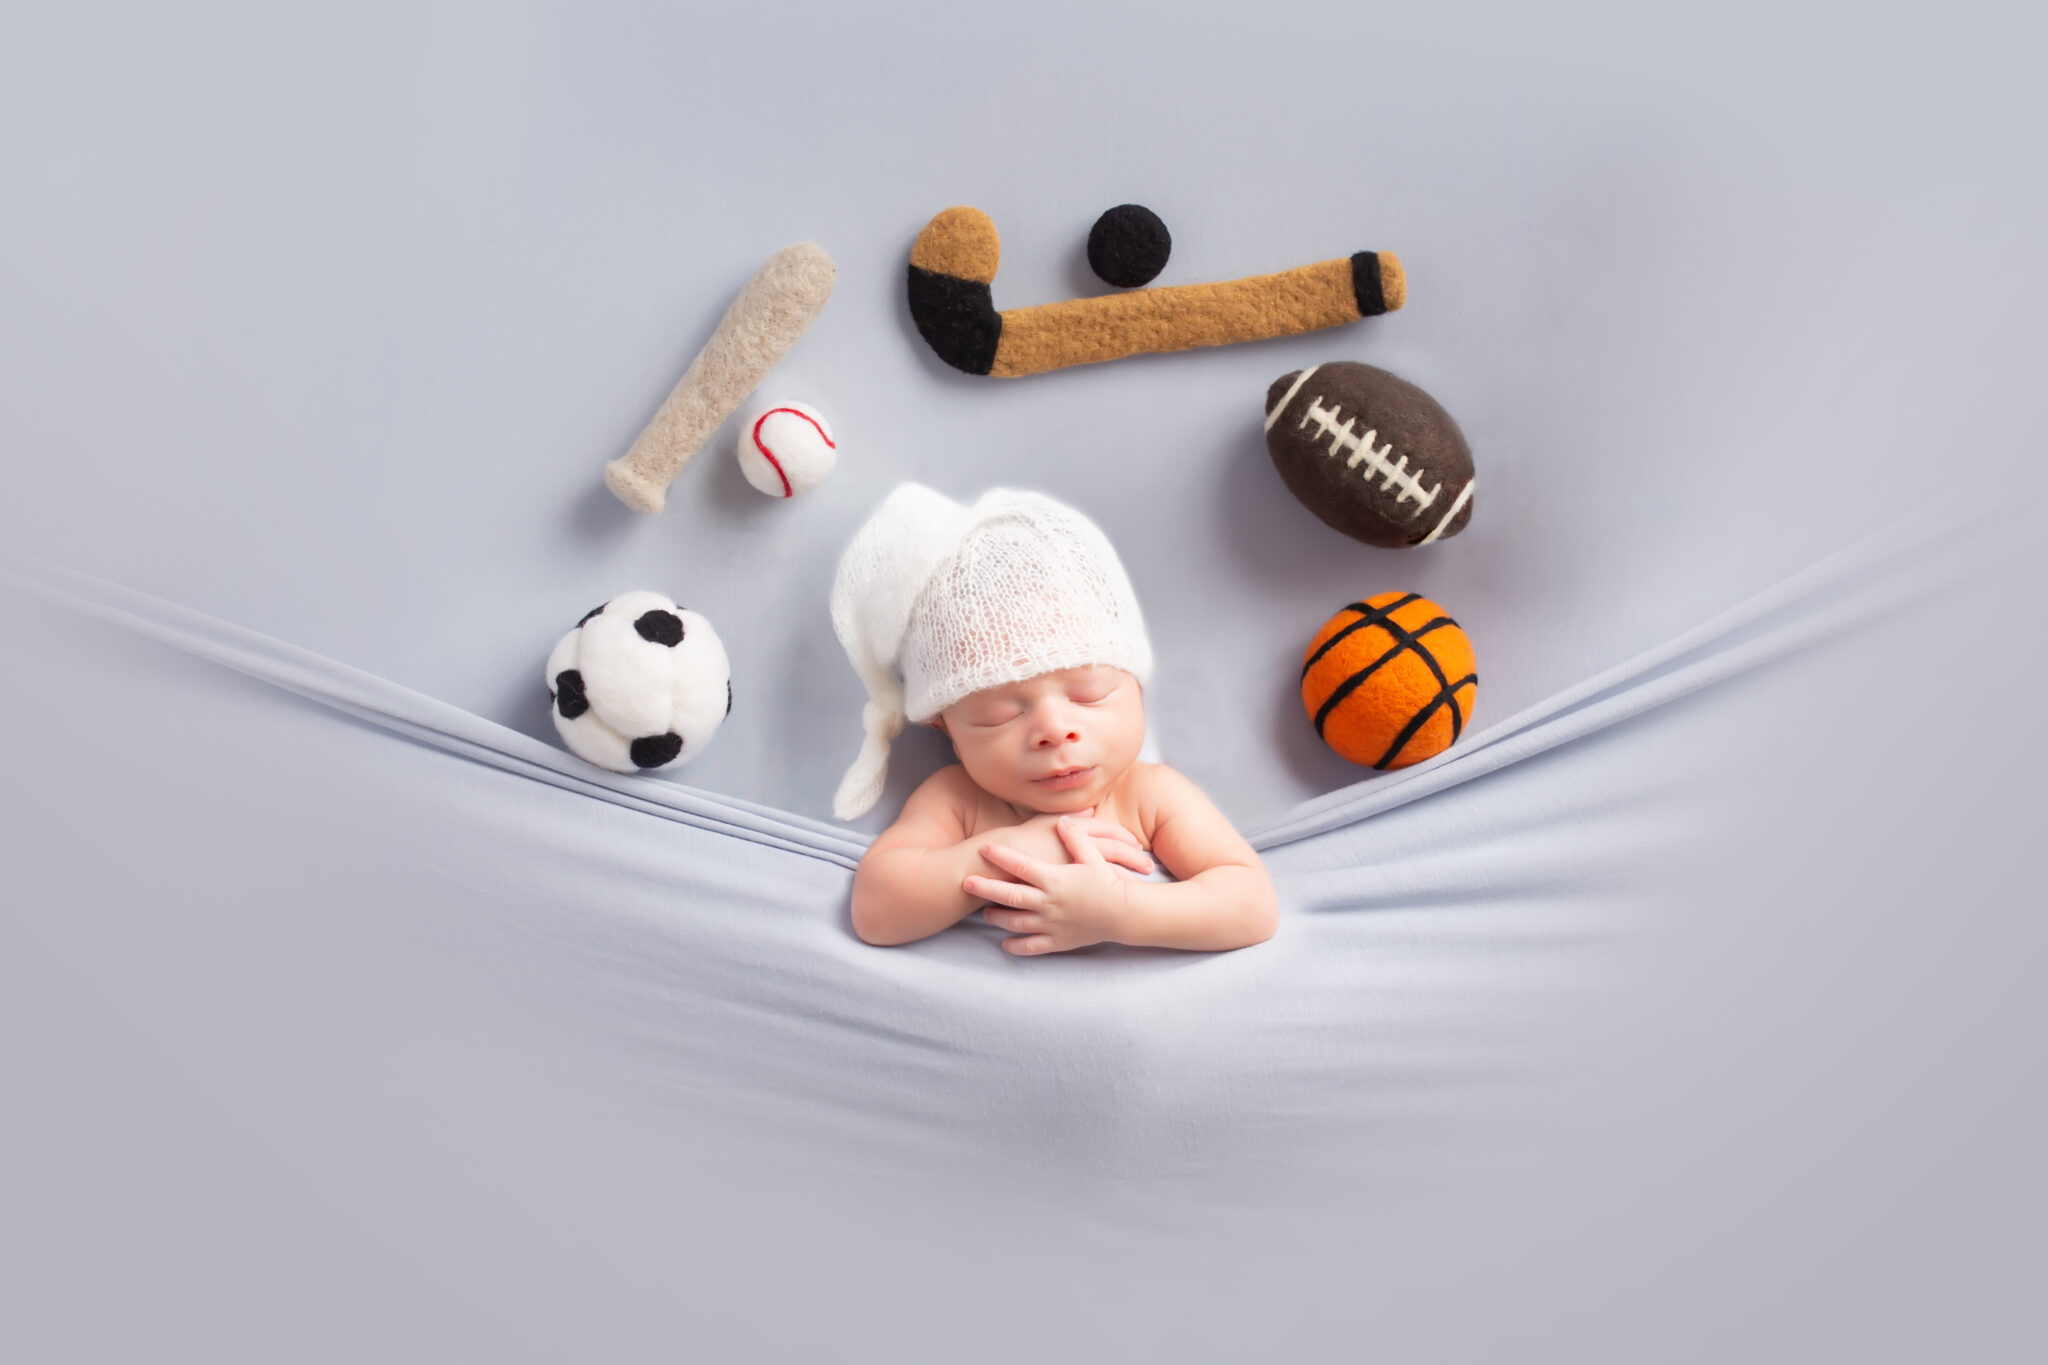 Dallas newborn photographer poses baby in tucked in pose with all sports balls and objects